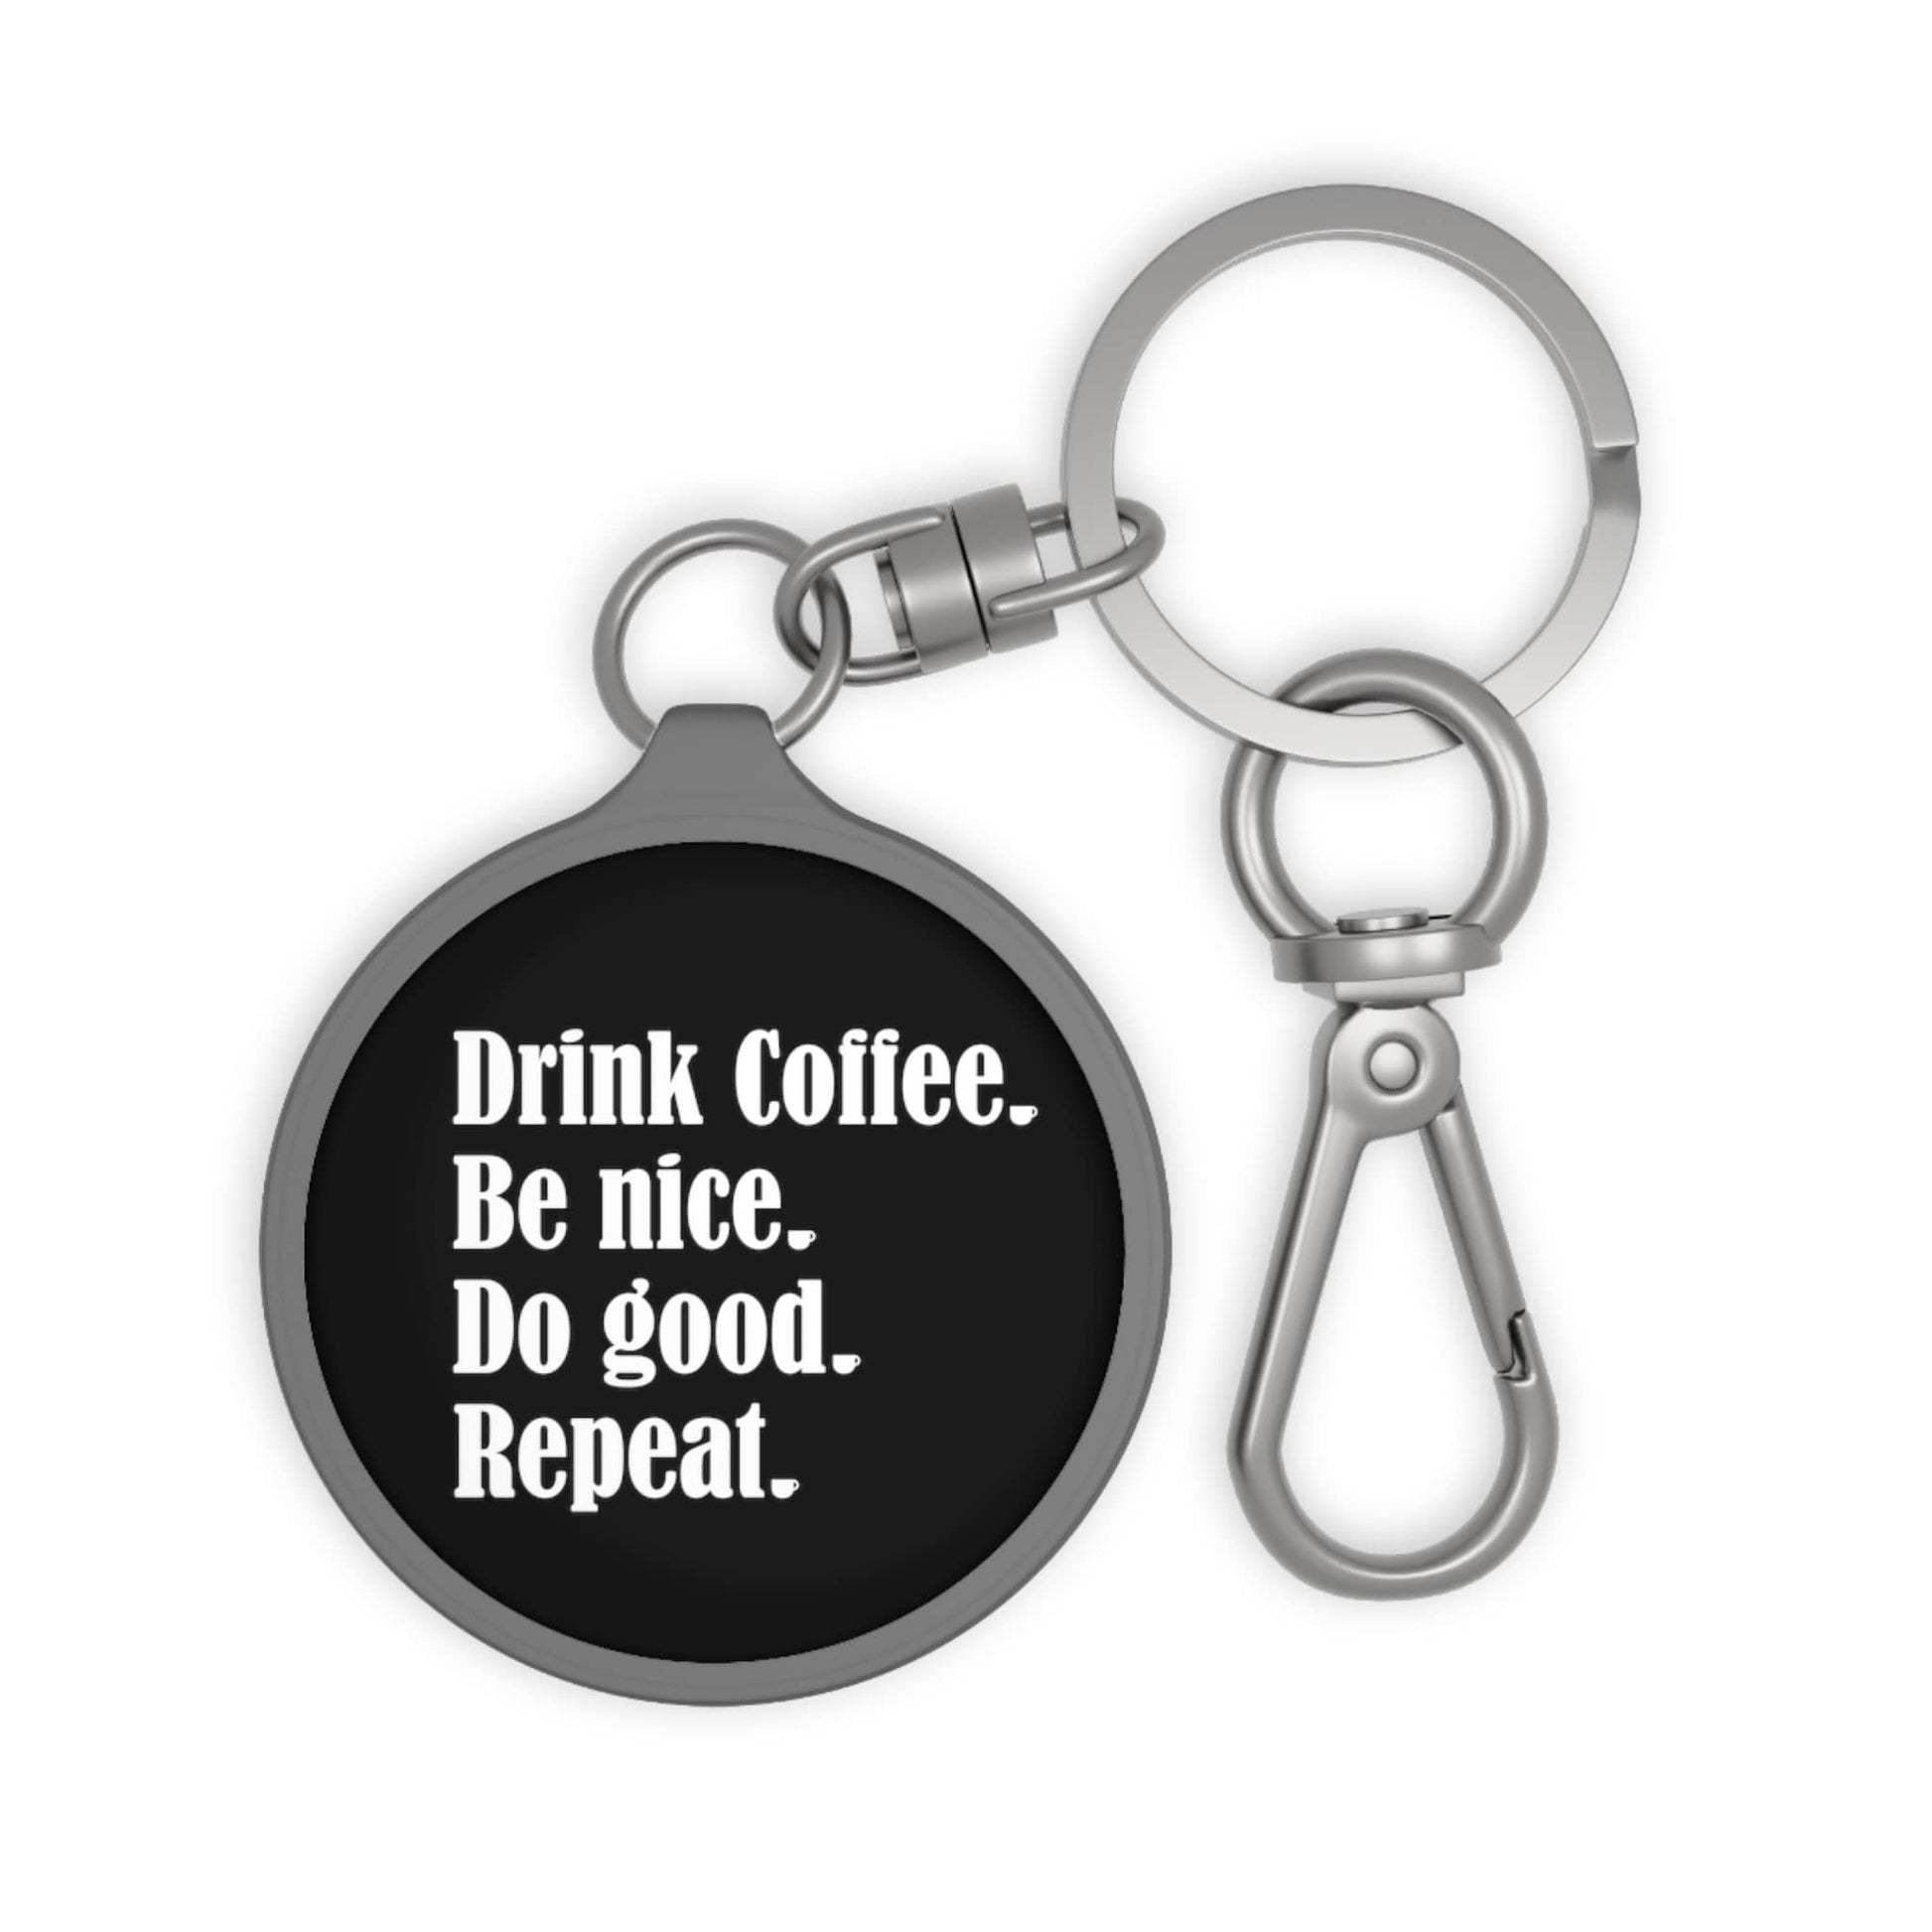 Good Bean Gifts "Drink Coffee, Be Nice, Do Good, Repeat". Keyring Tag (Black w/gray trim) One size / Grey